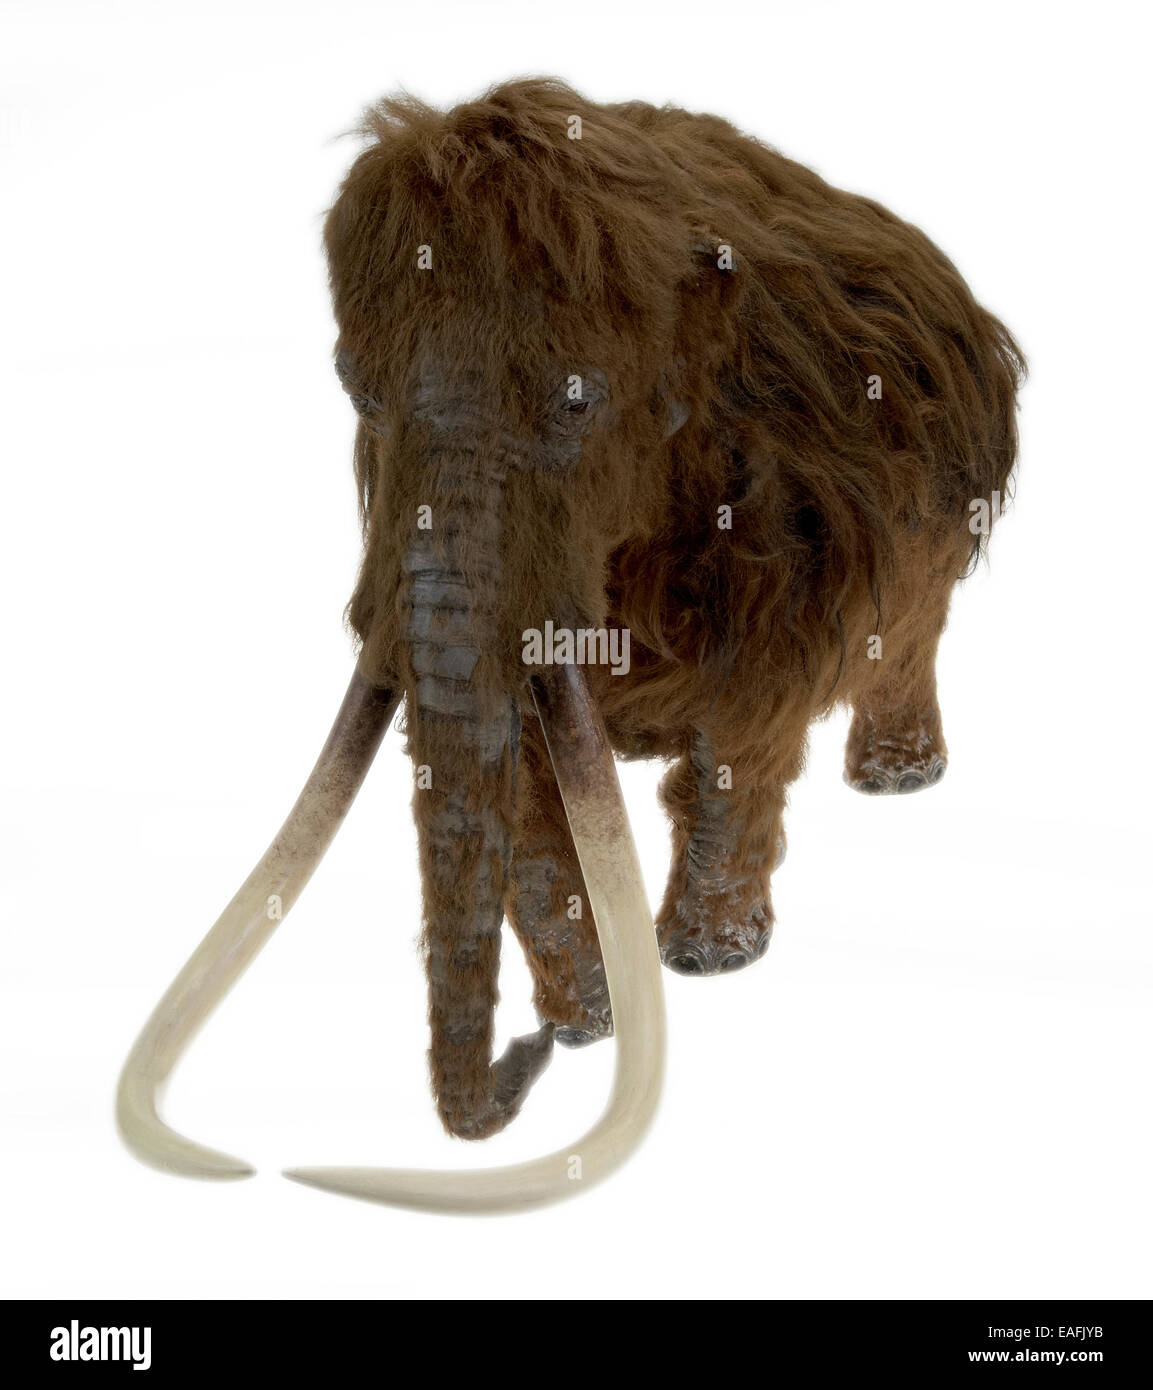 Model of the Ilford Mammoth Stock Photo